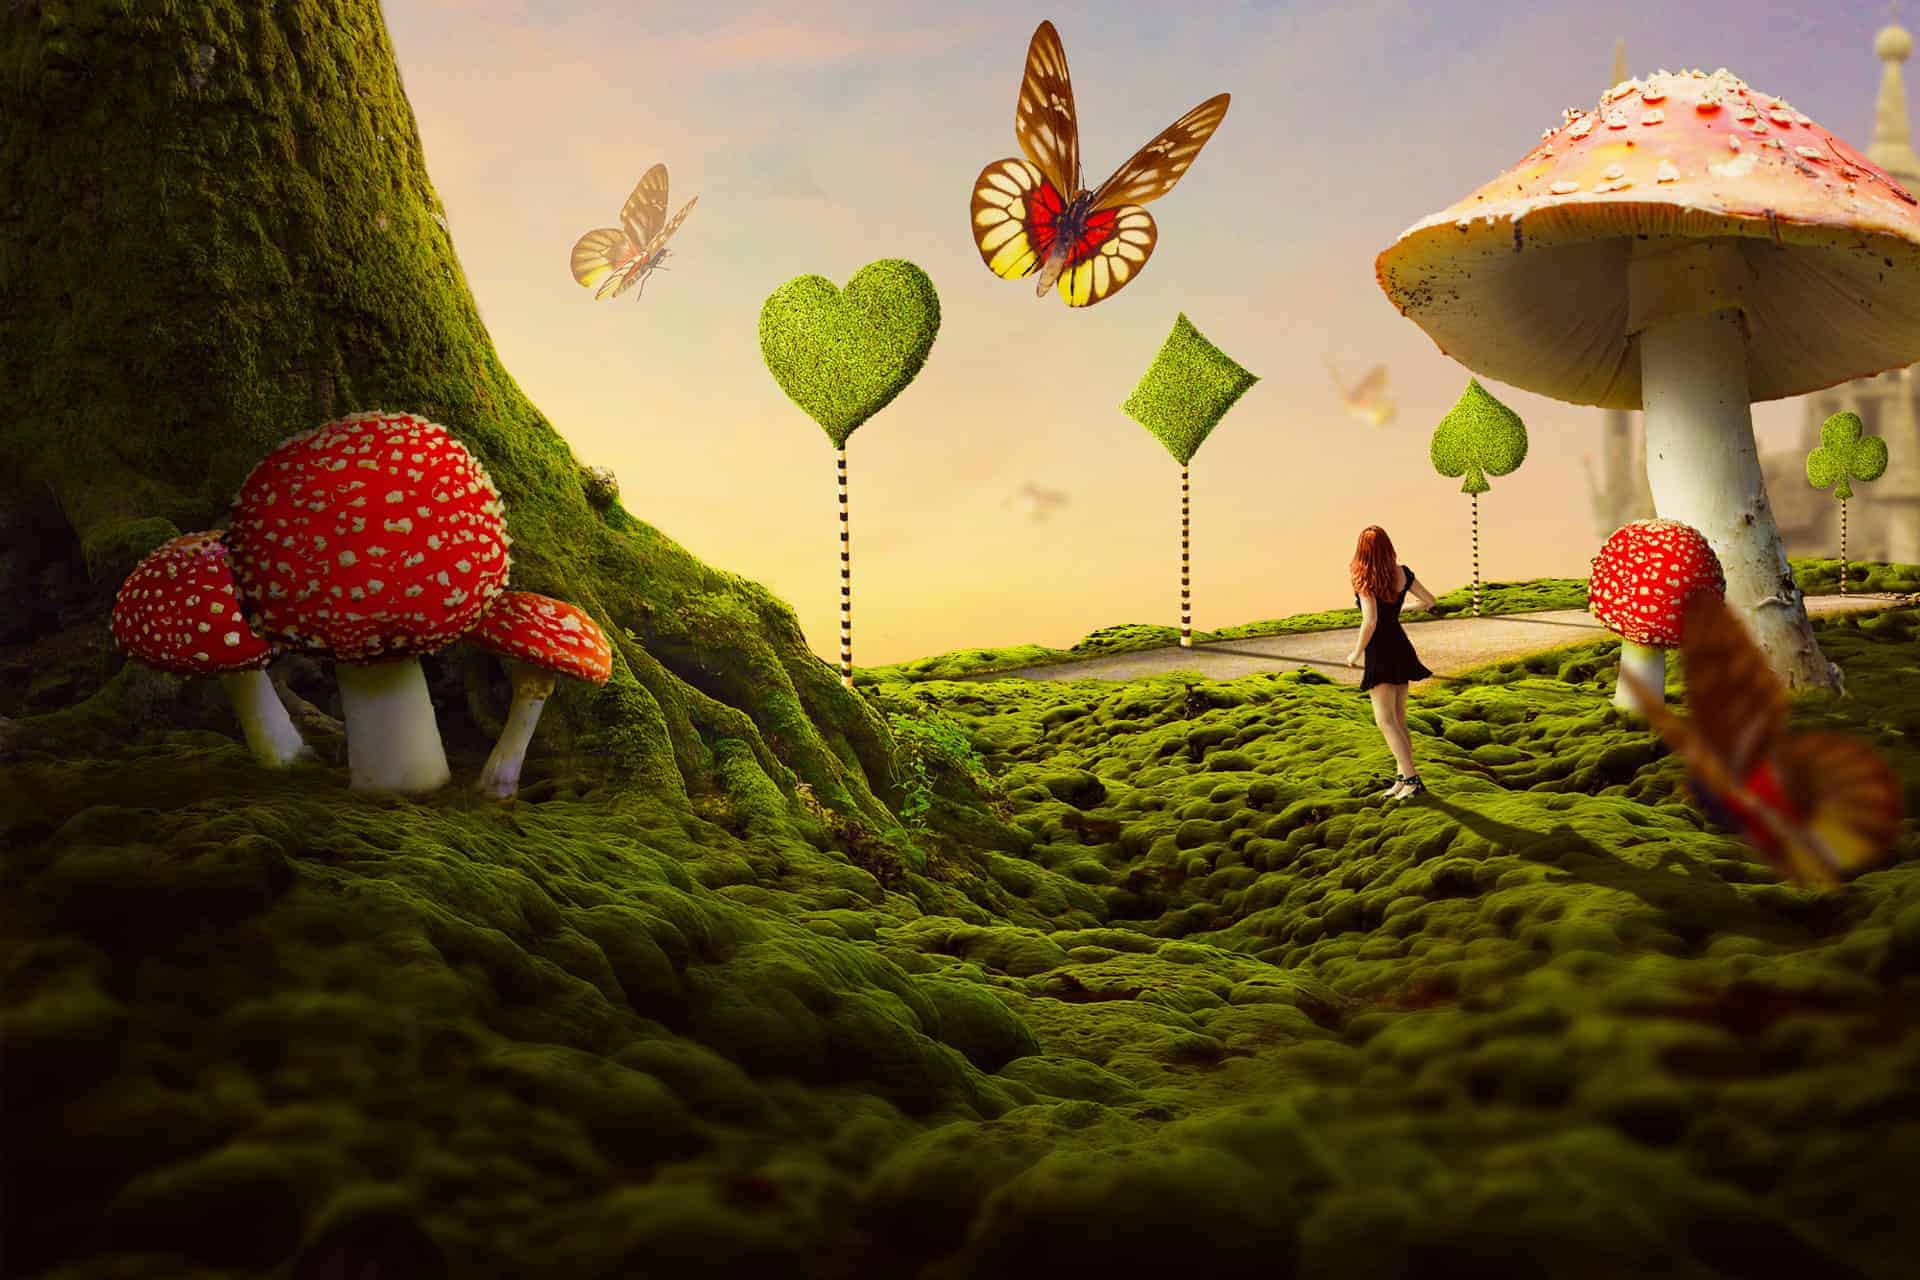 How to Create a Wonderland Photo Manipulation with Photoshop